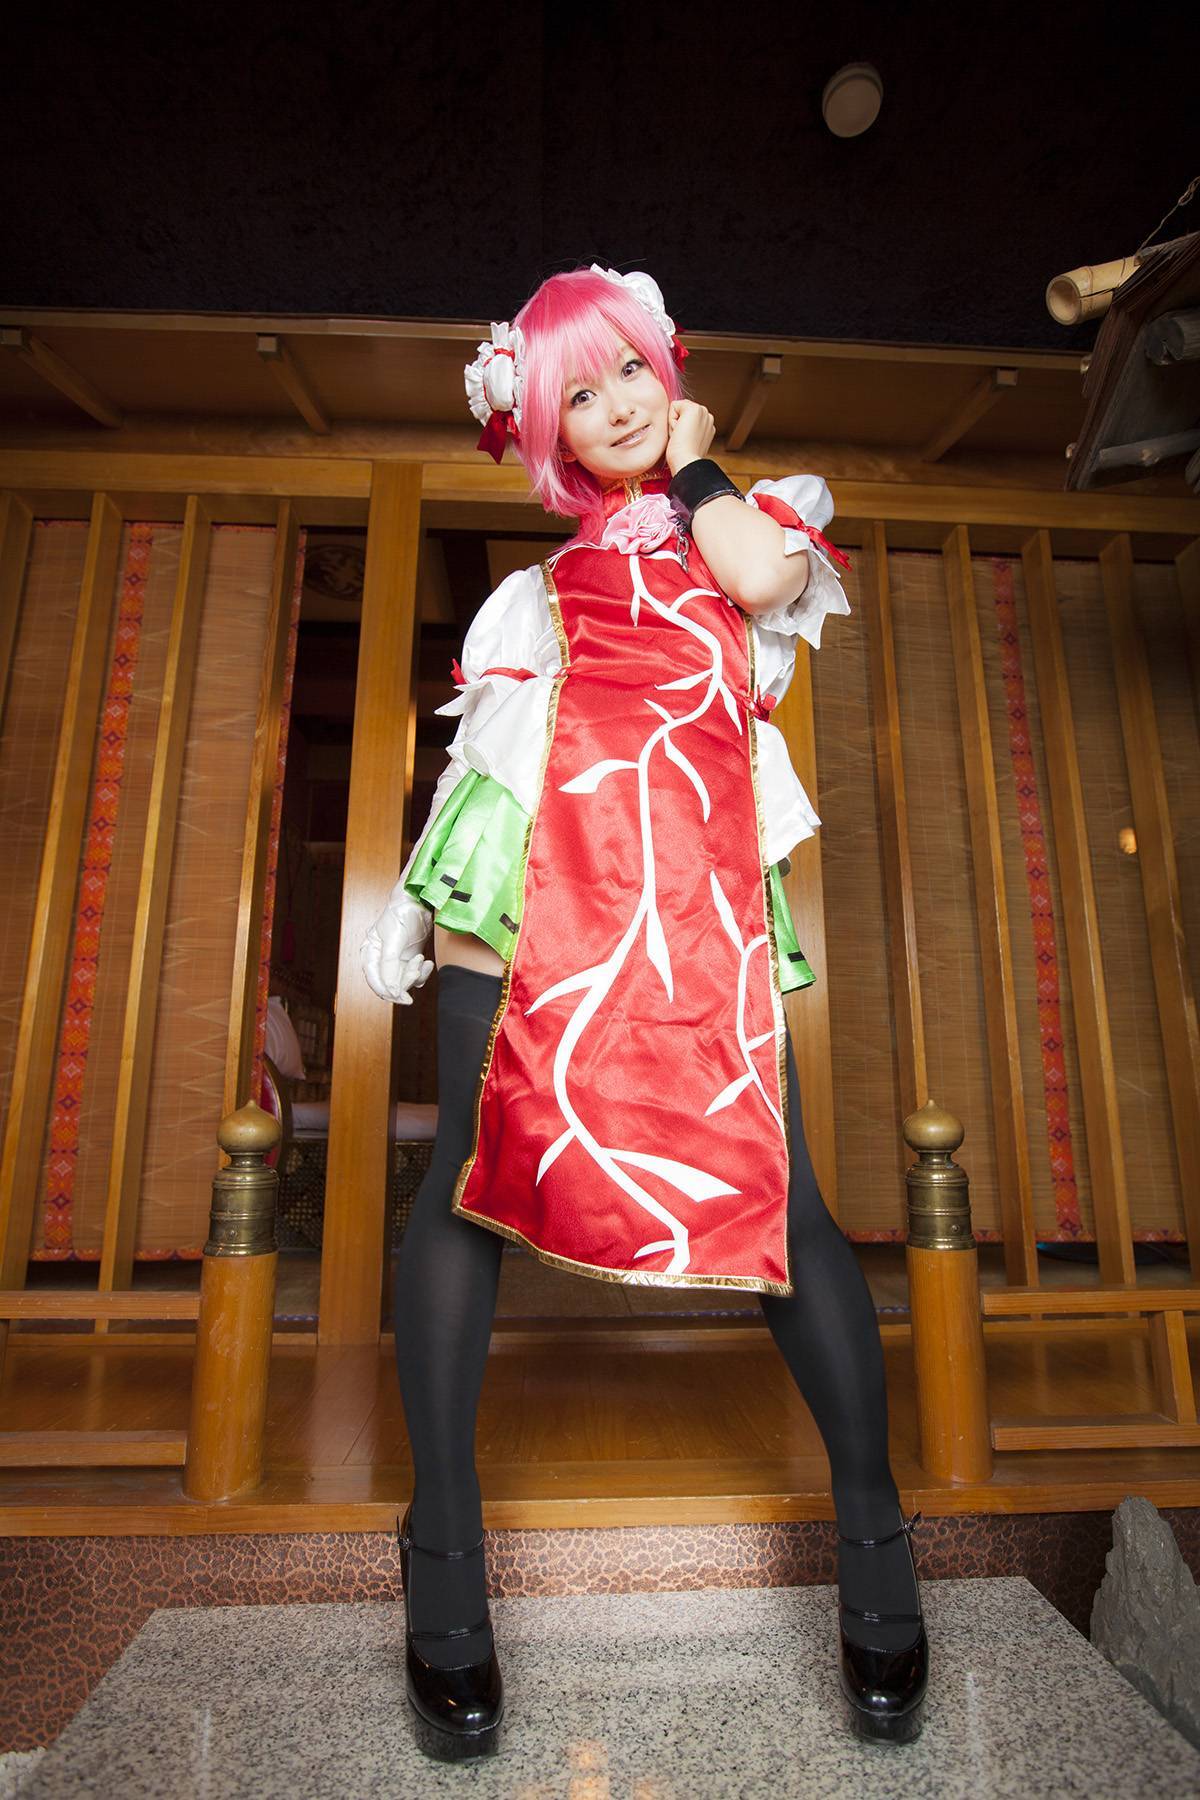 [Cosplay] 2013.12.13 New Touhou Project Cosplay set - Awesome Kasen Ibara